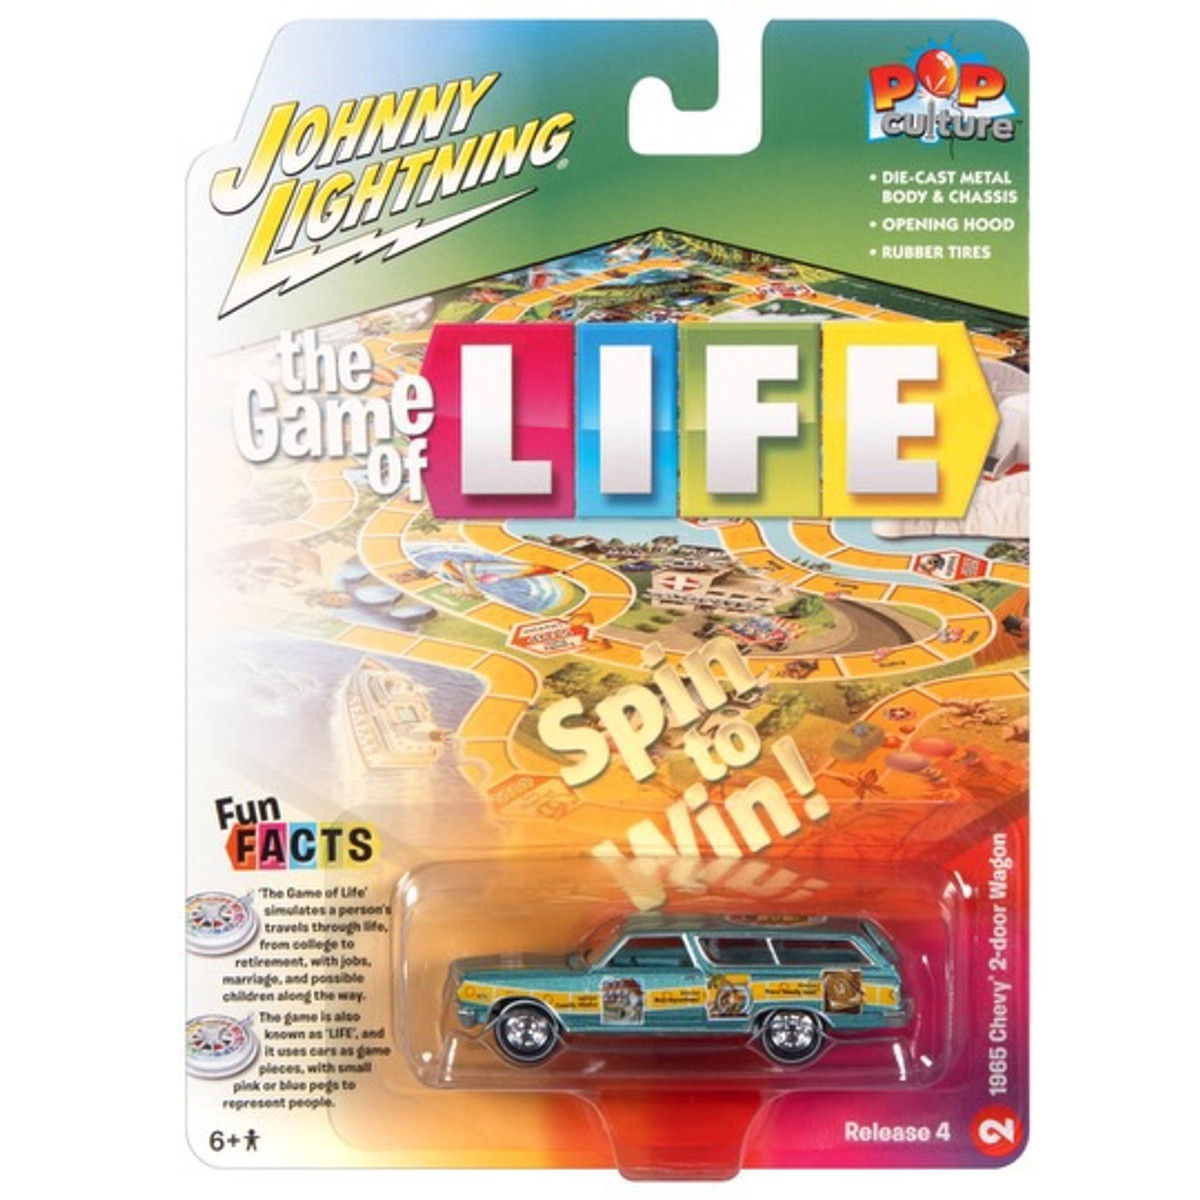 2022 Johnny Lightning Pop Culture The Game Of Life 1965 Chevy 2-Door Wagon Release 4 